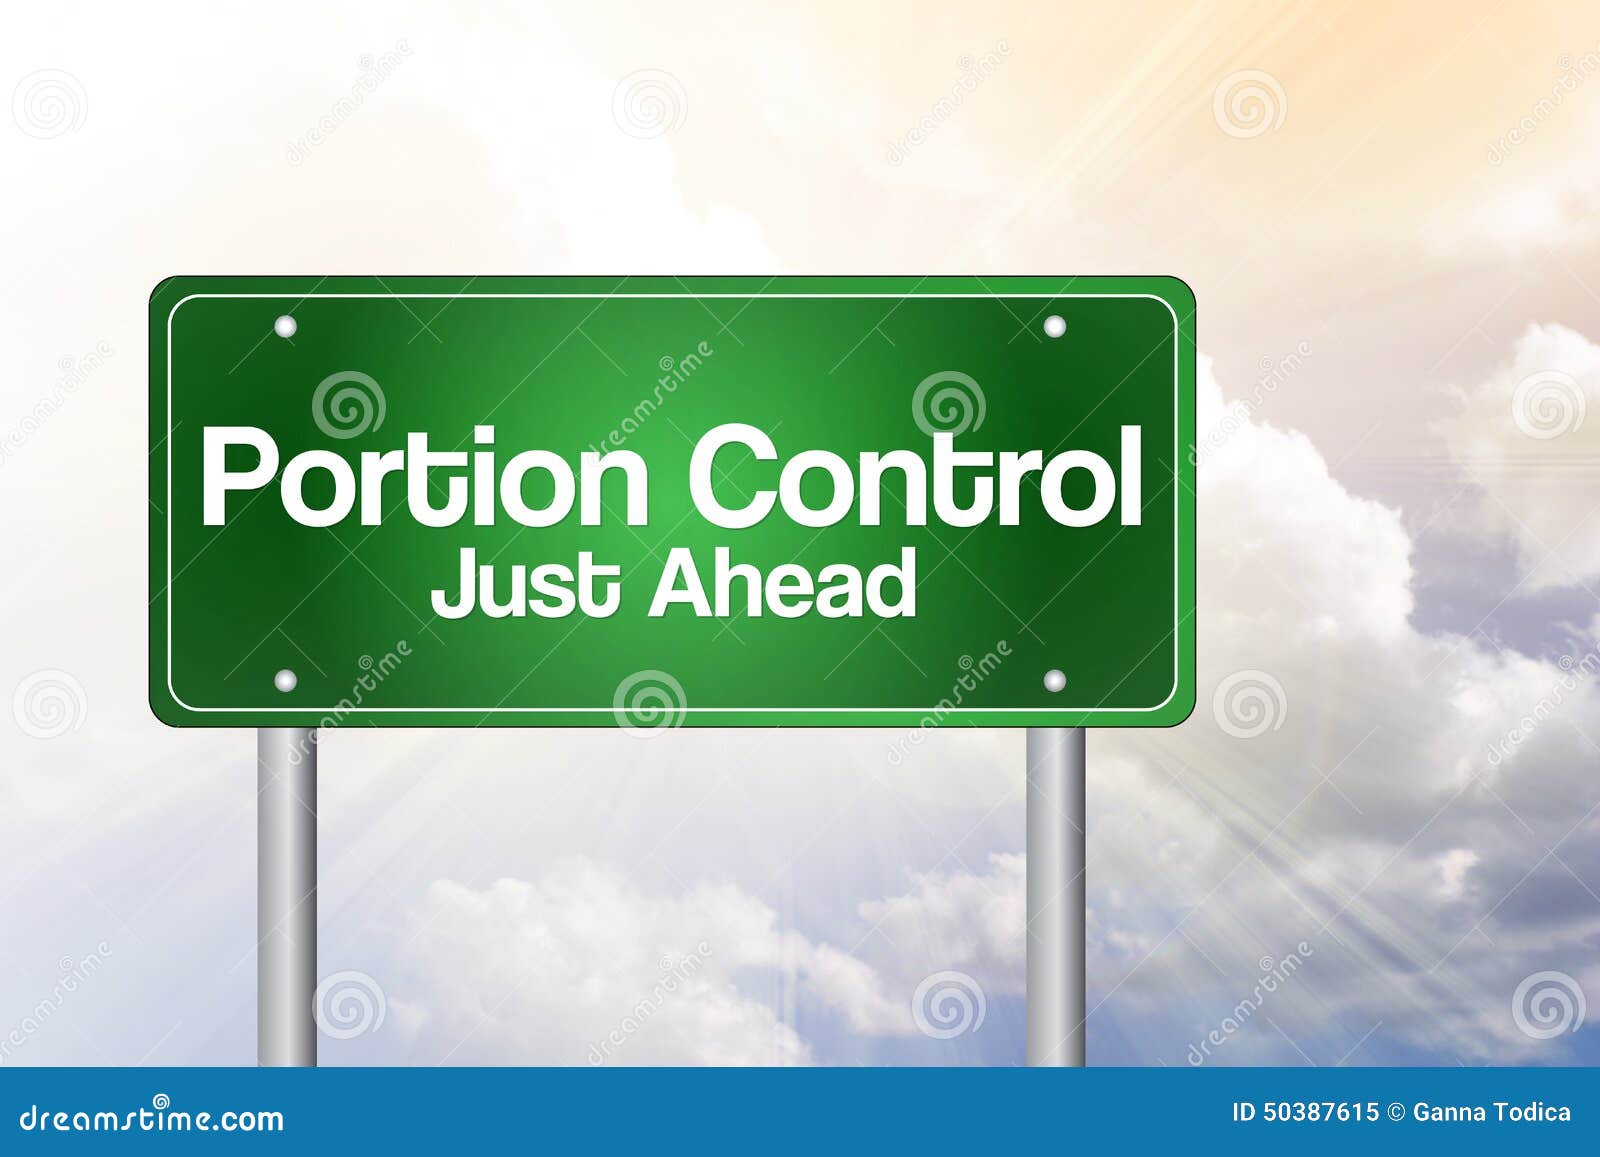 portion control just ahead green road sign